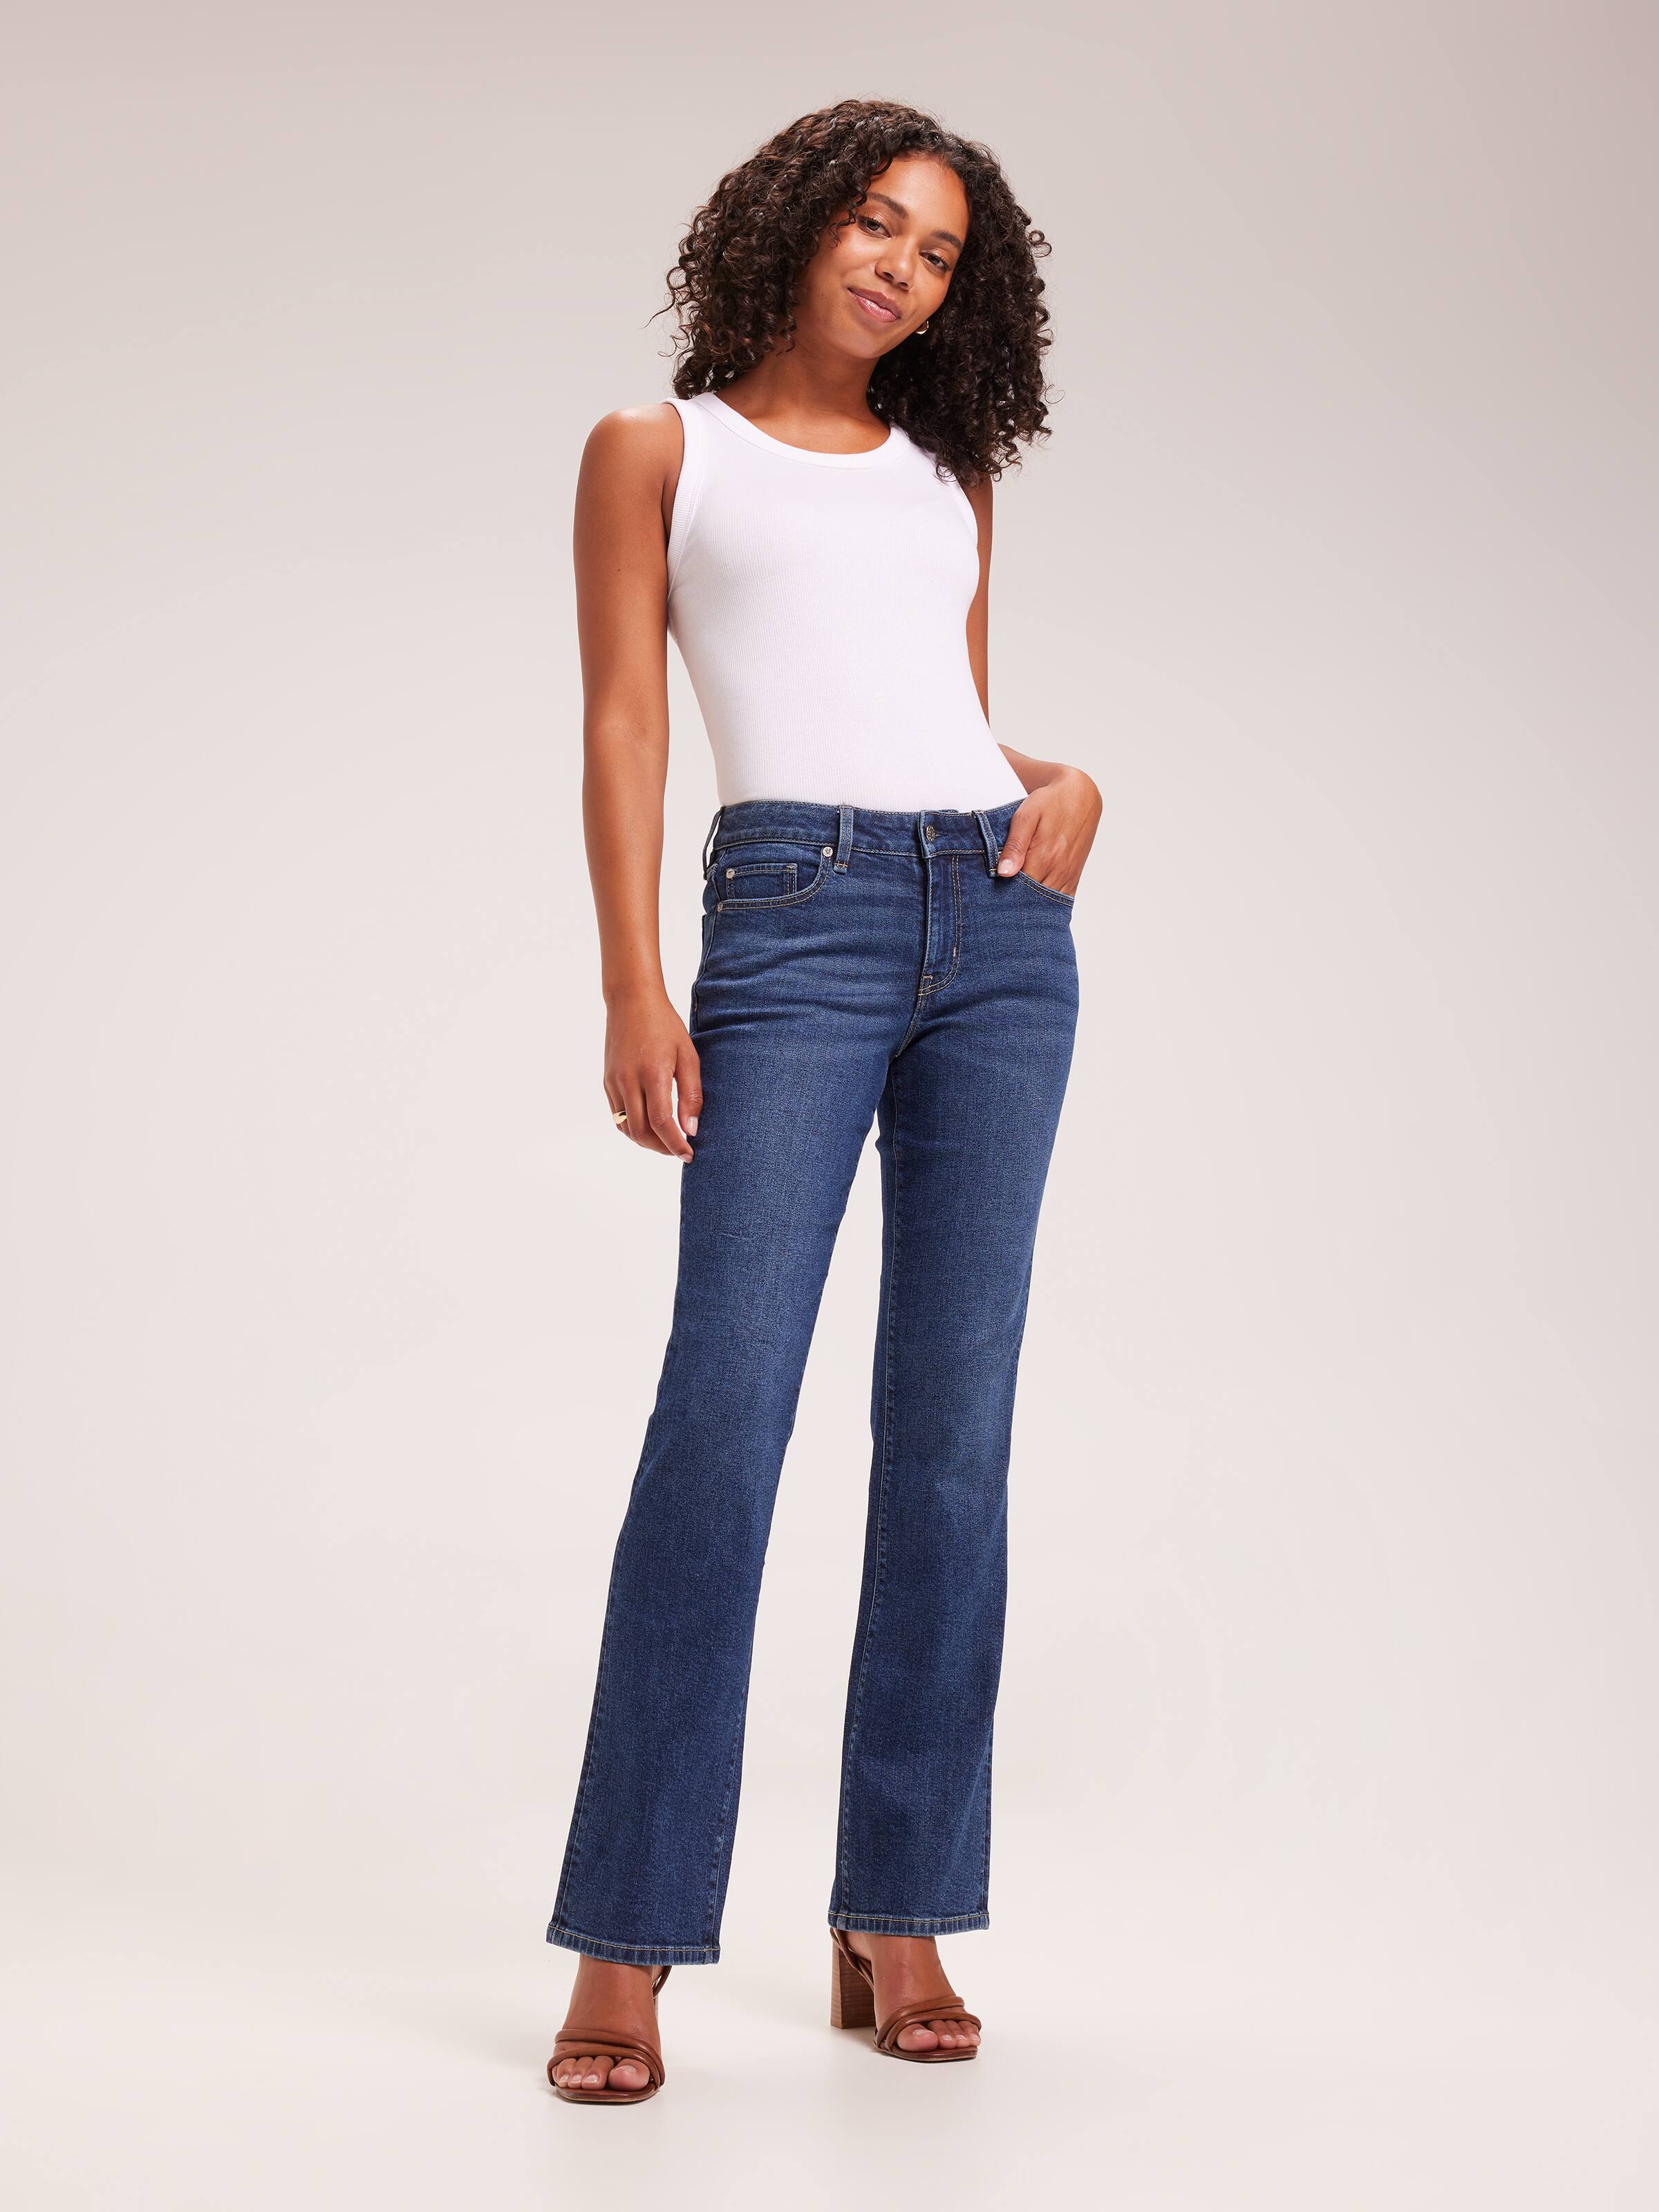 High-Waisted Women's Pants for sale in Cape Town, Western Cape